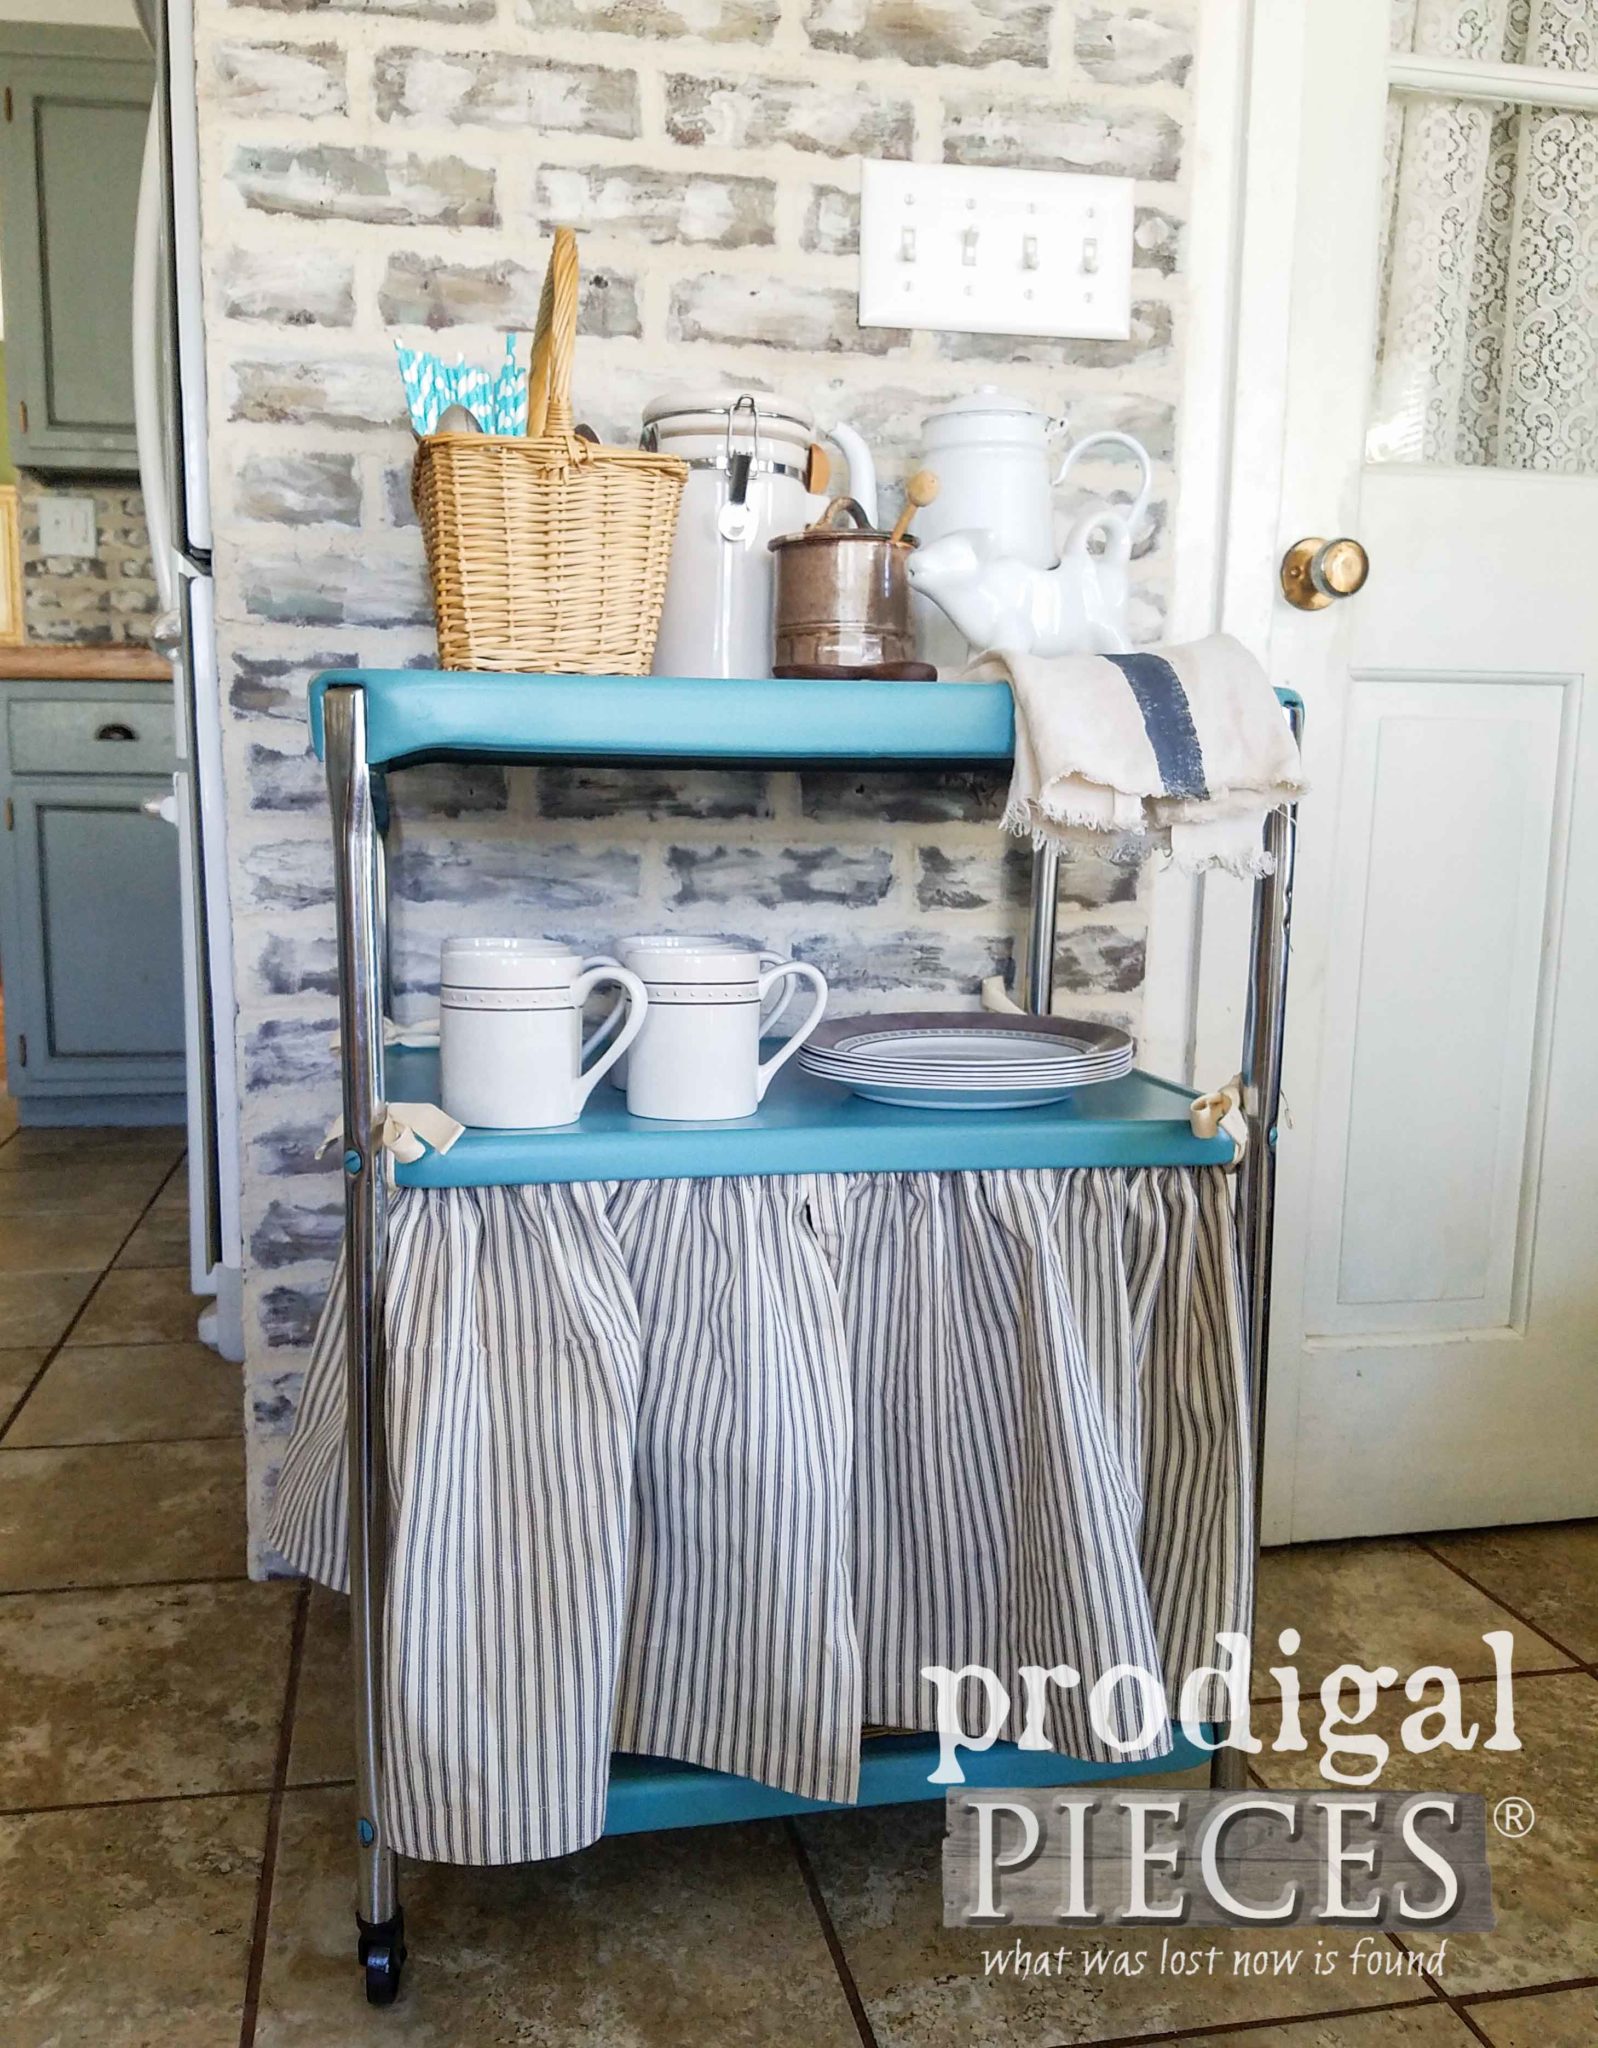 Vintage Teal Cosco Serving Cart with Baskets and Dust Ruffle Skirt ~ DIY tutorial by Larissa of Prodigal Pieces | prodigalpieces.com